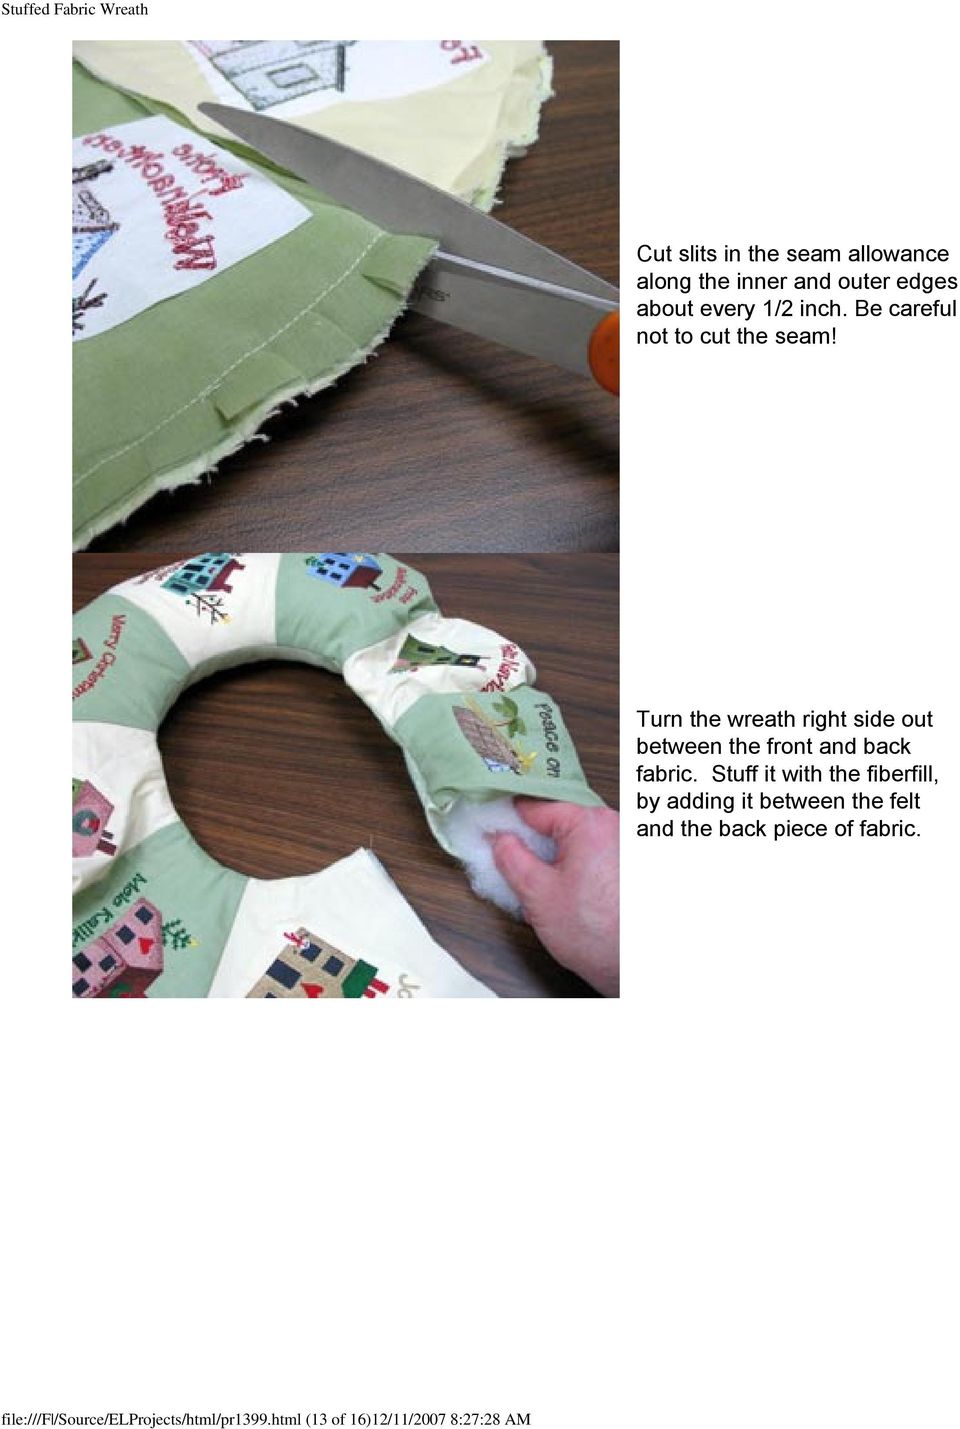 Turn the wreath right side out between the front and back fabric.